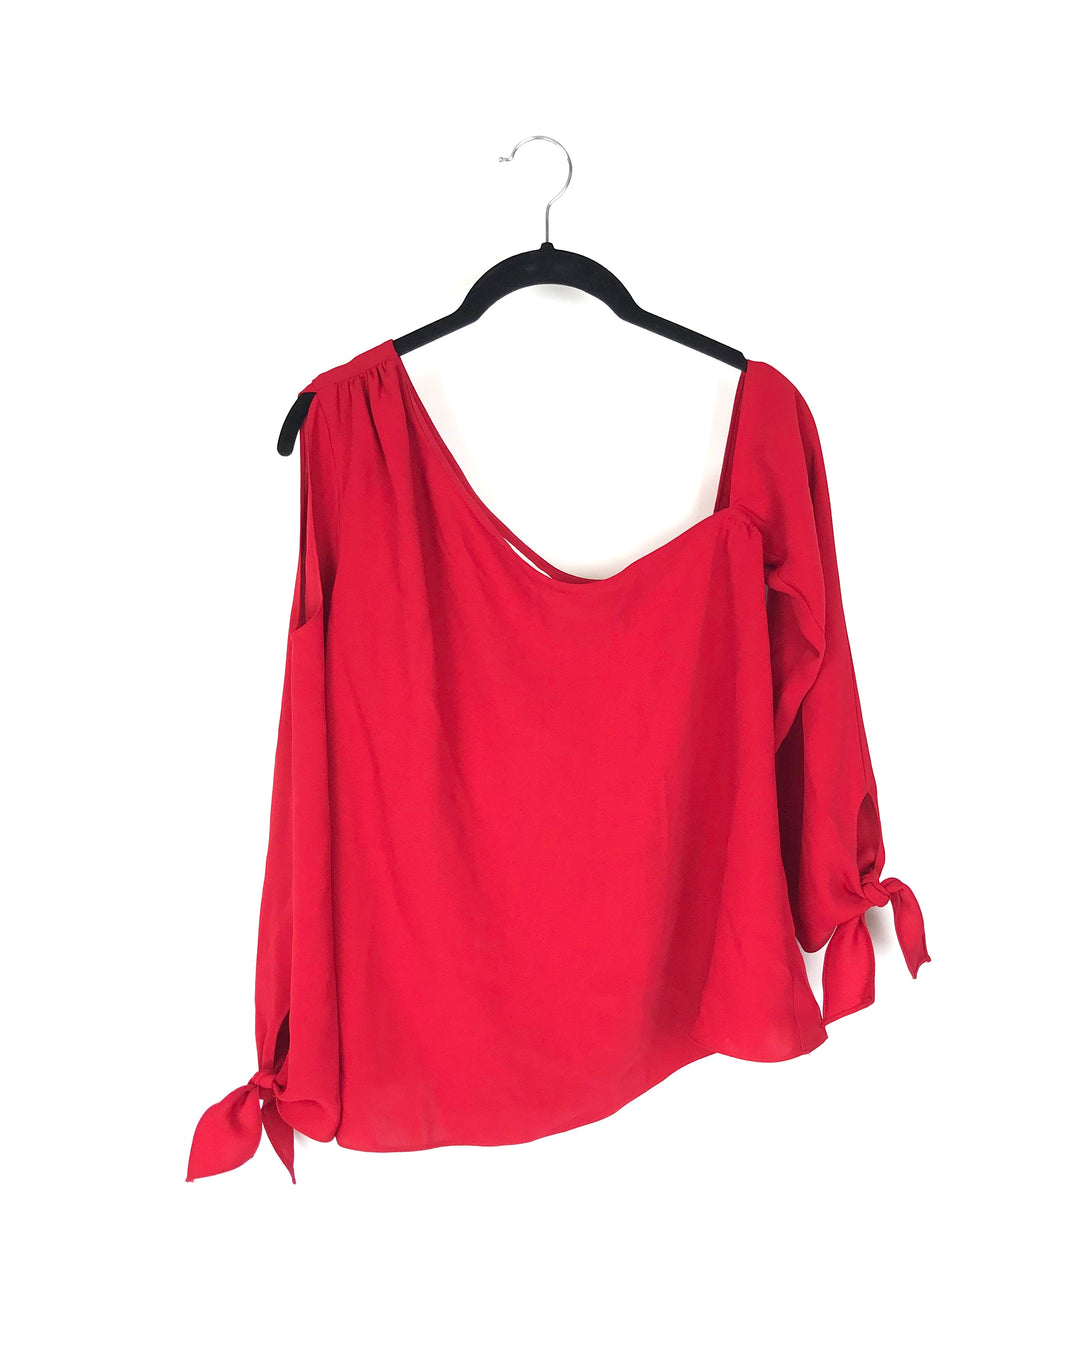 Red Long Sleeve Top - Small